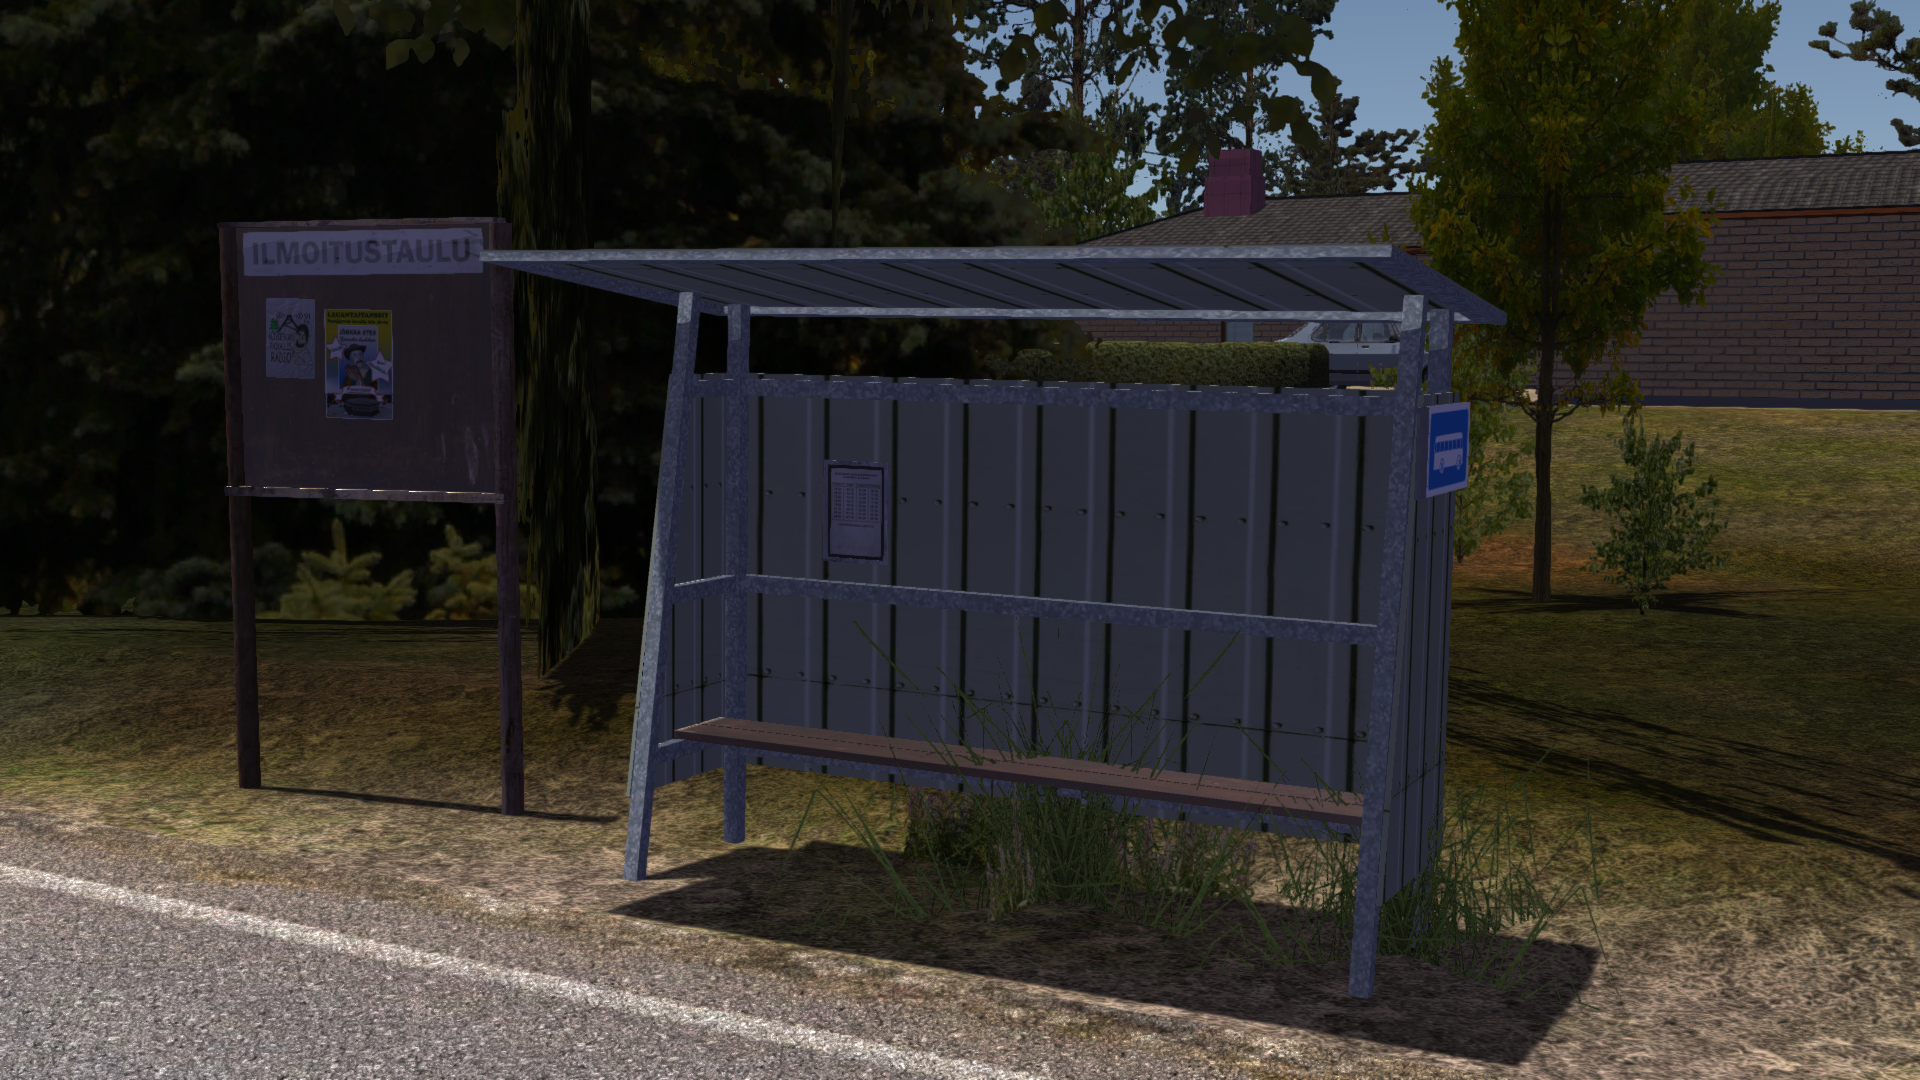 My Summer Car - Where does the Bus go? Making Teimo MAD! - My